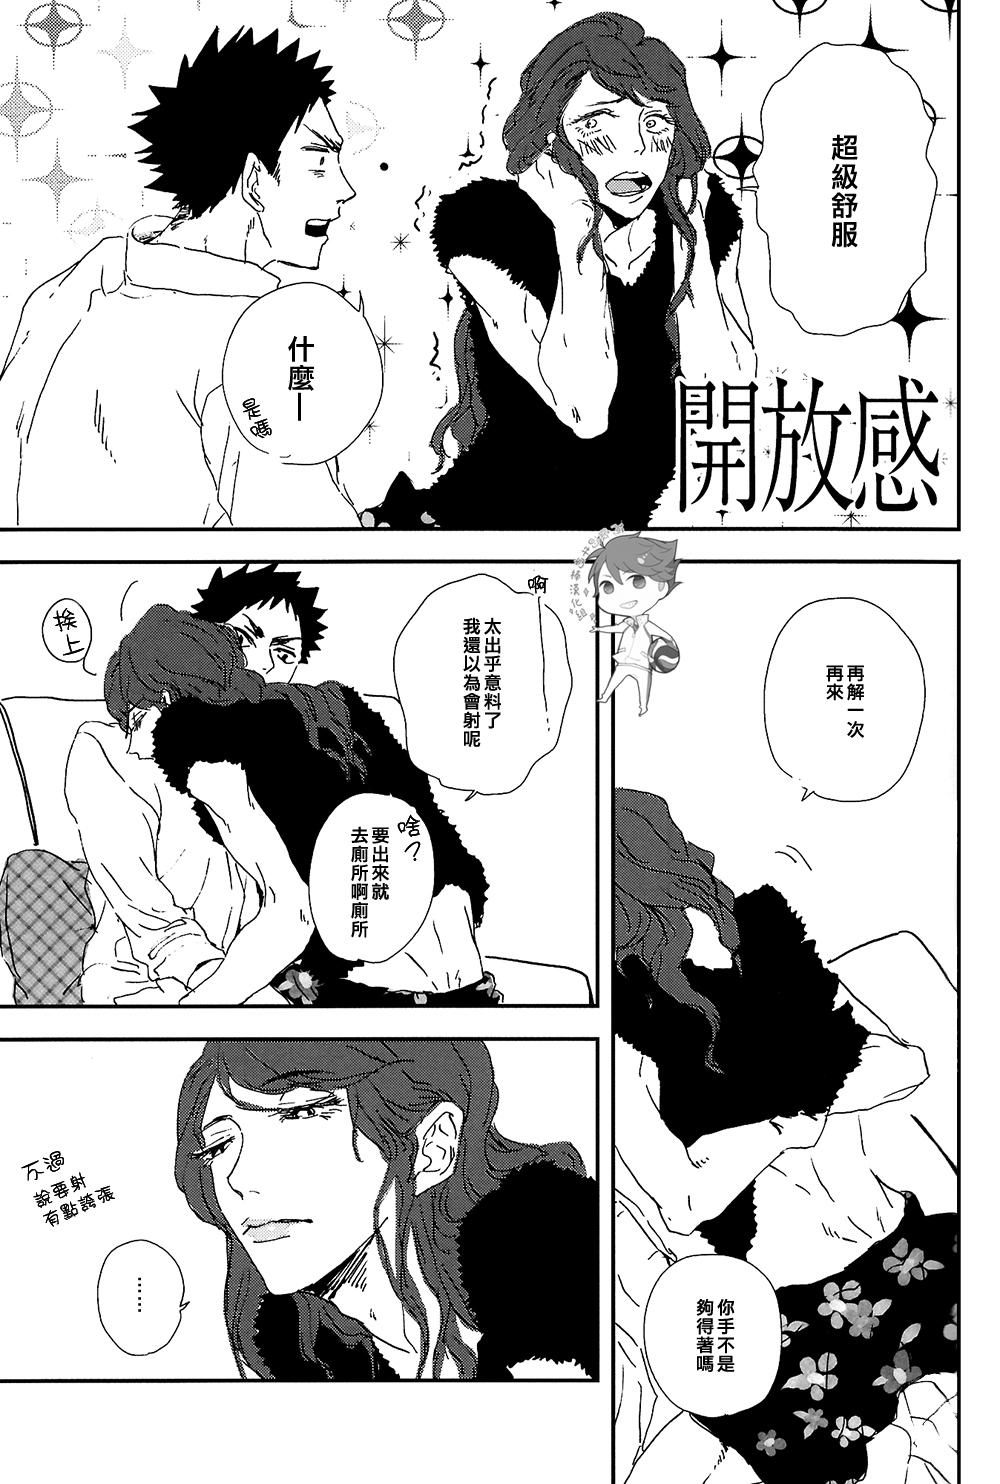 Missionary Porn DRAG QUEEN - Haikyuu Movie - Page 9